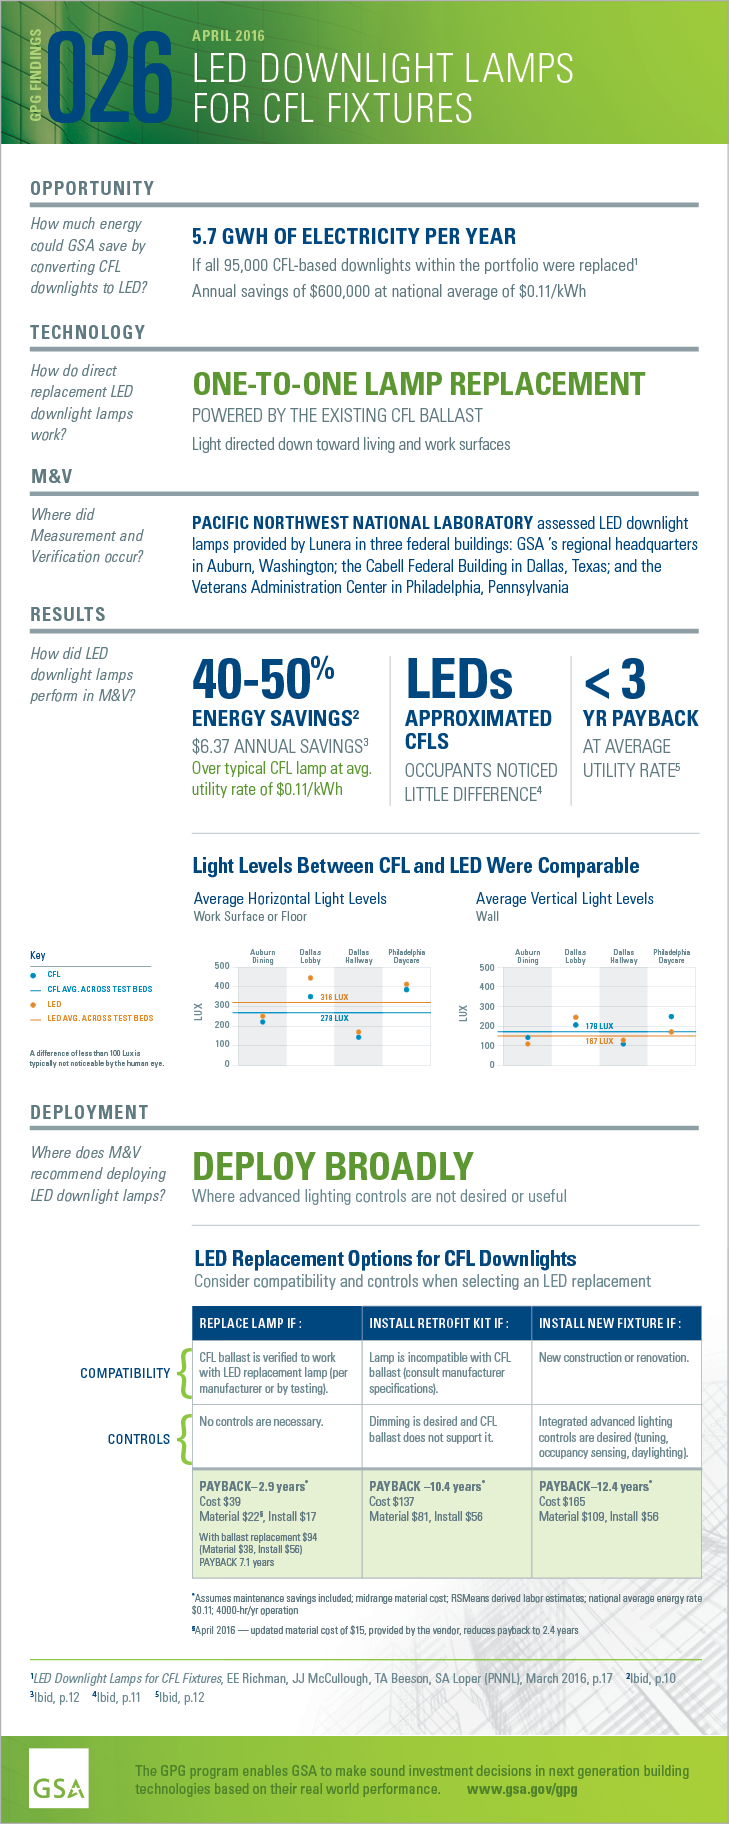 Download the PDF of the full-size infographic for GPG026 LED Downlight Lamps for CFLs.